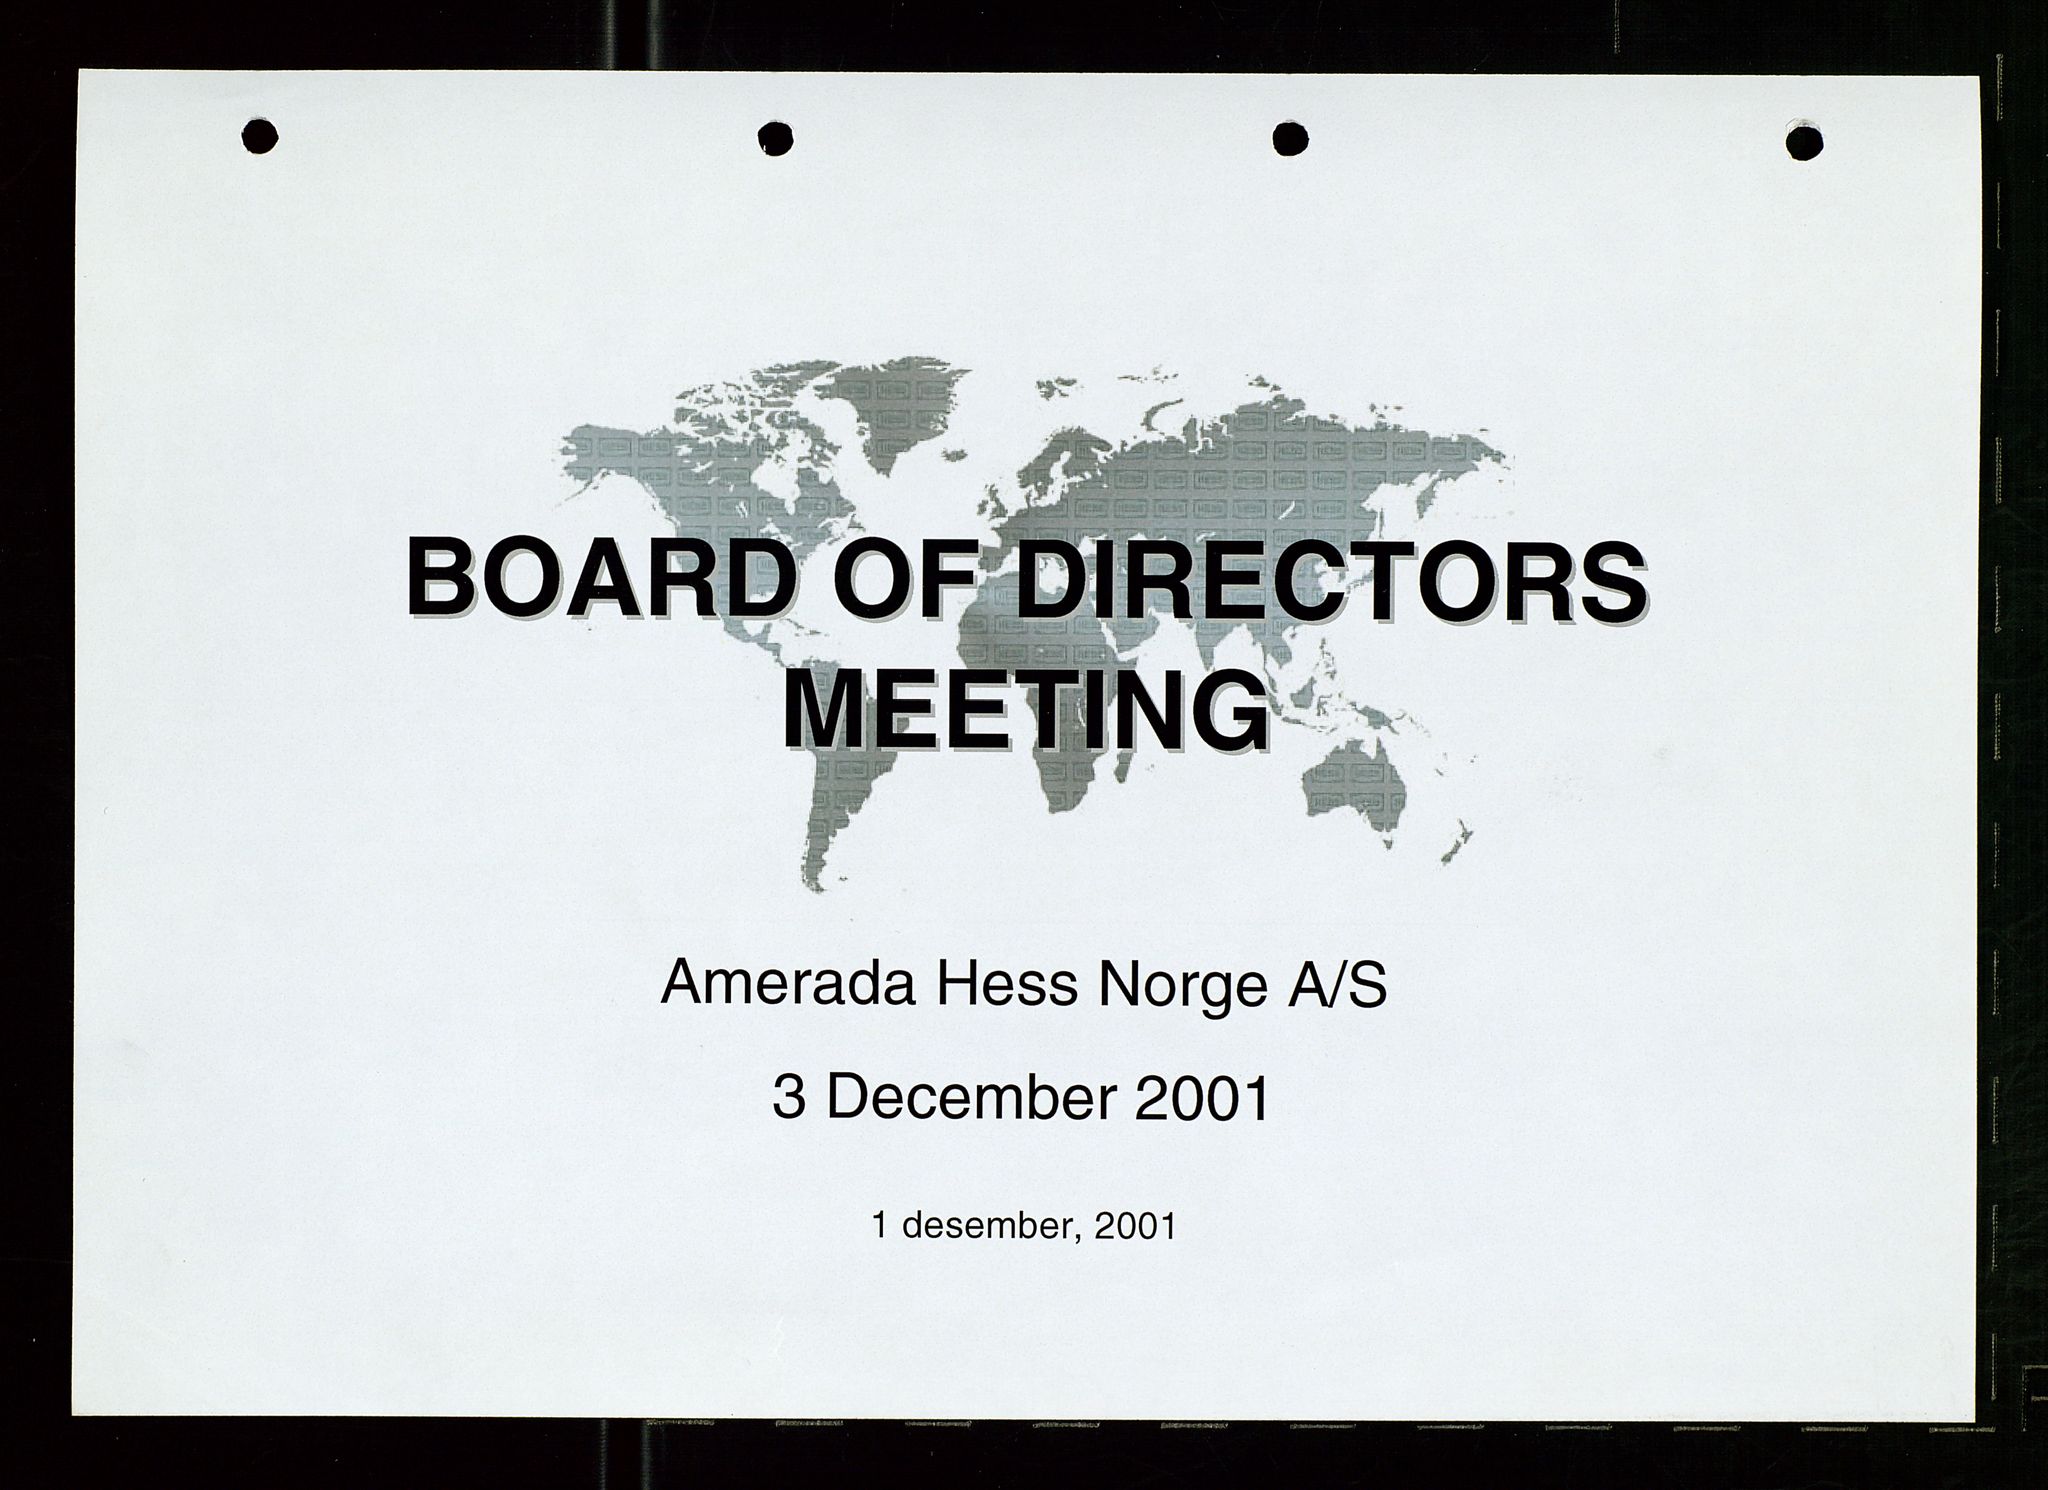 Pa 1766 - Hess Norge AS, SAST/A-102451/A/Aa/L0004: Referater og sakspapirer, 1999-2002, s. 179